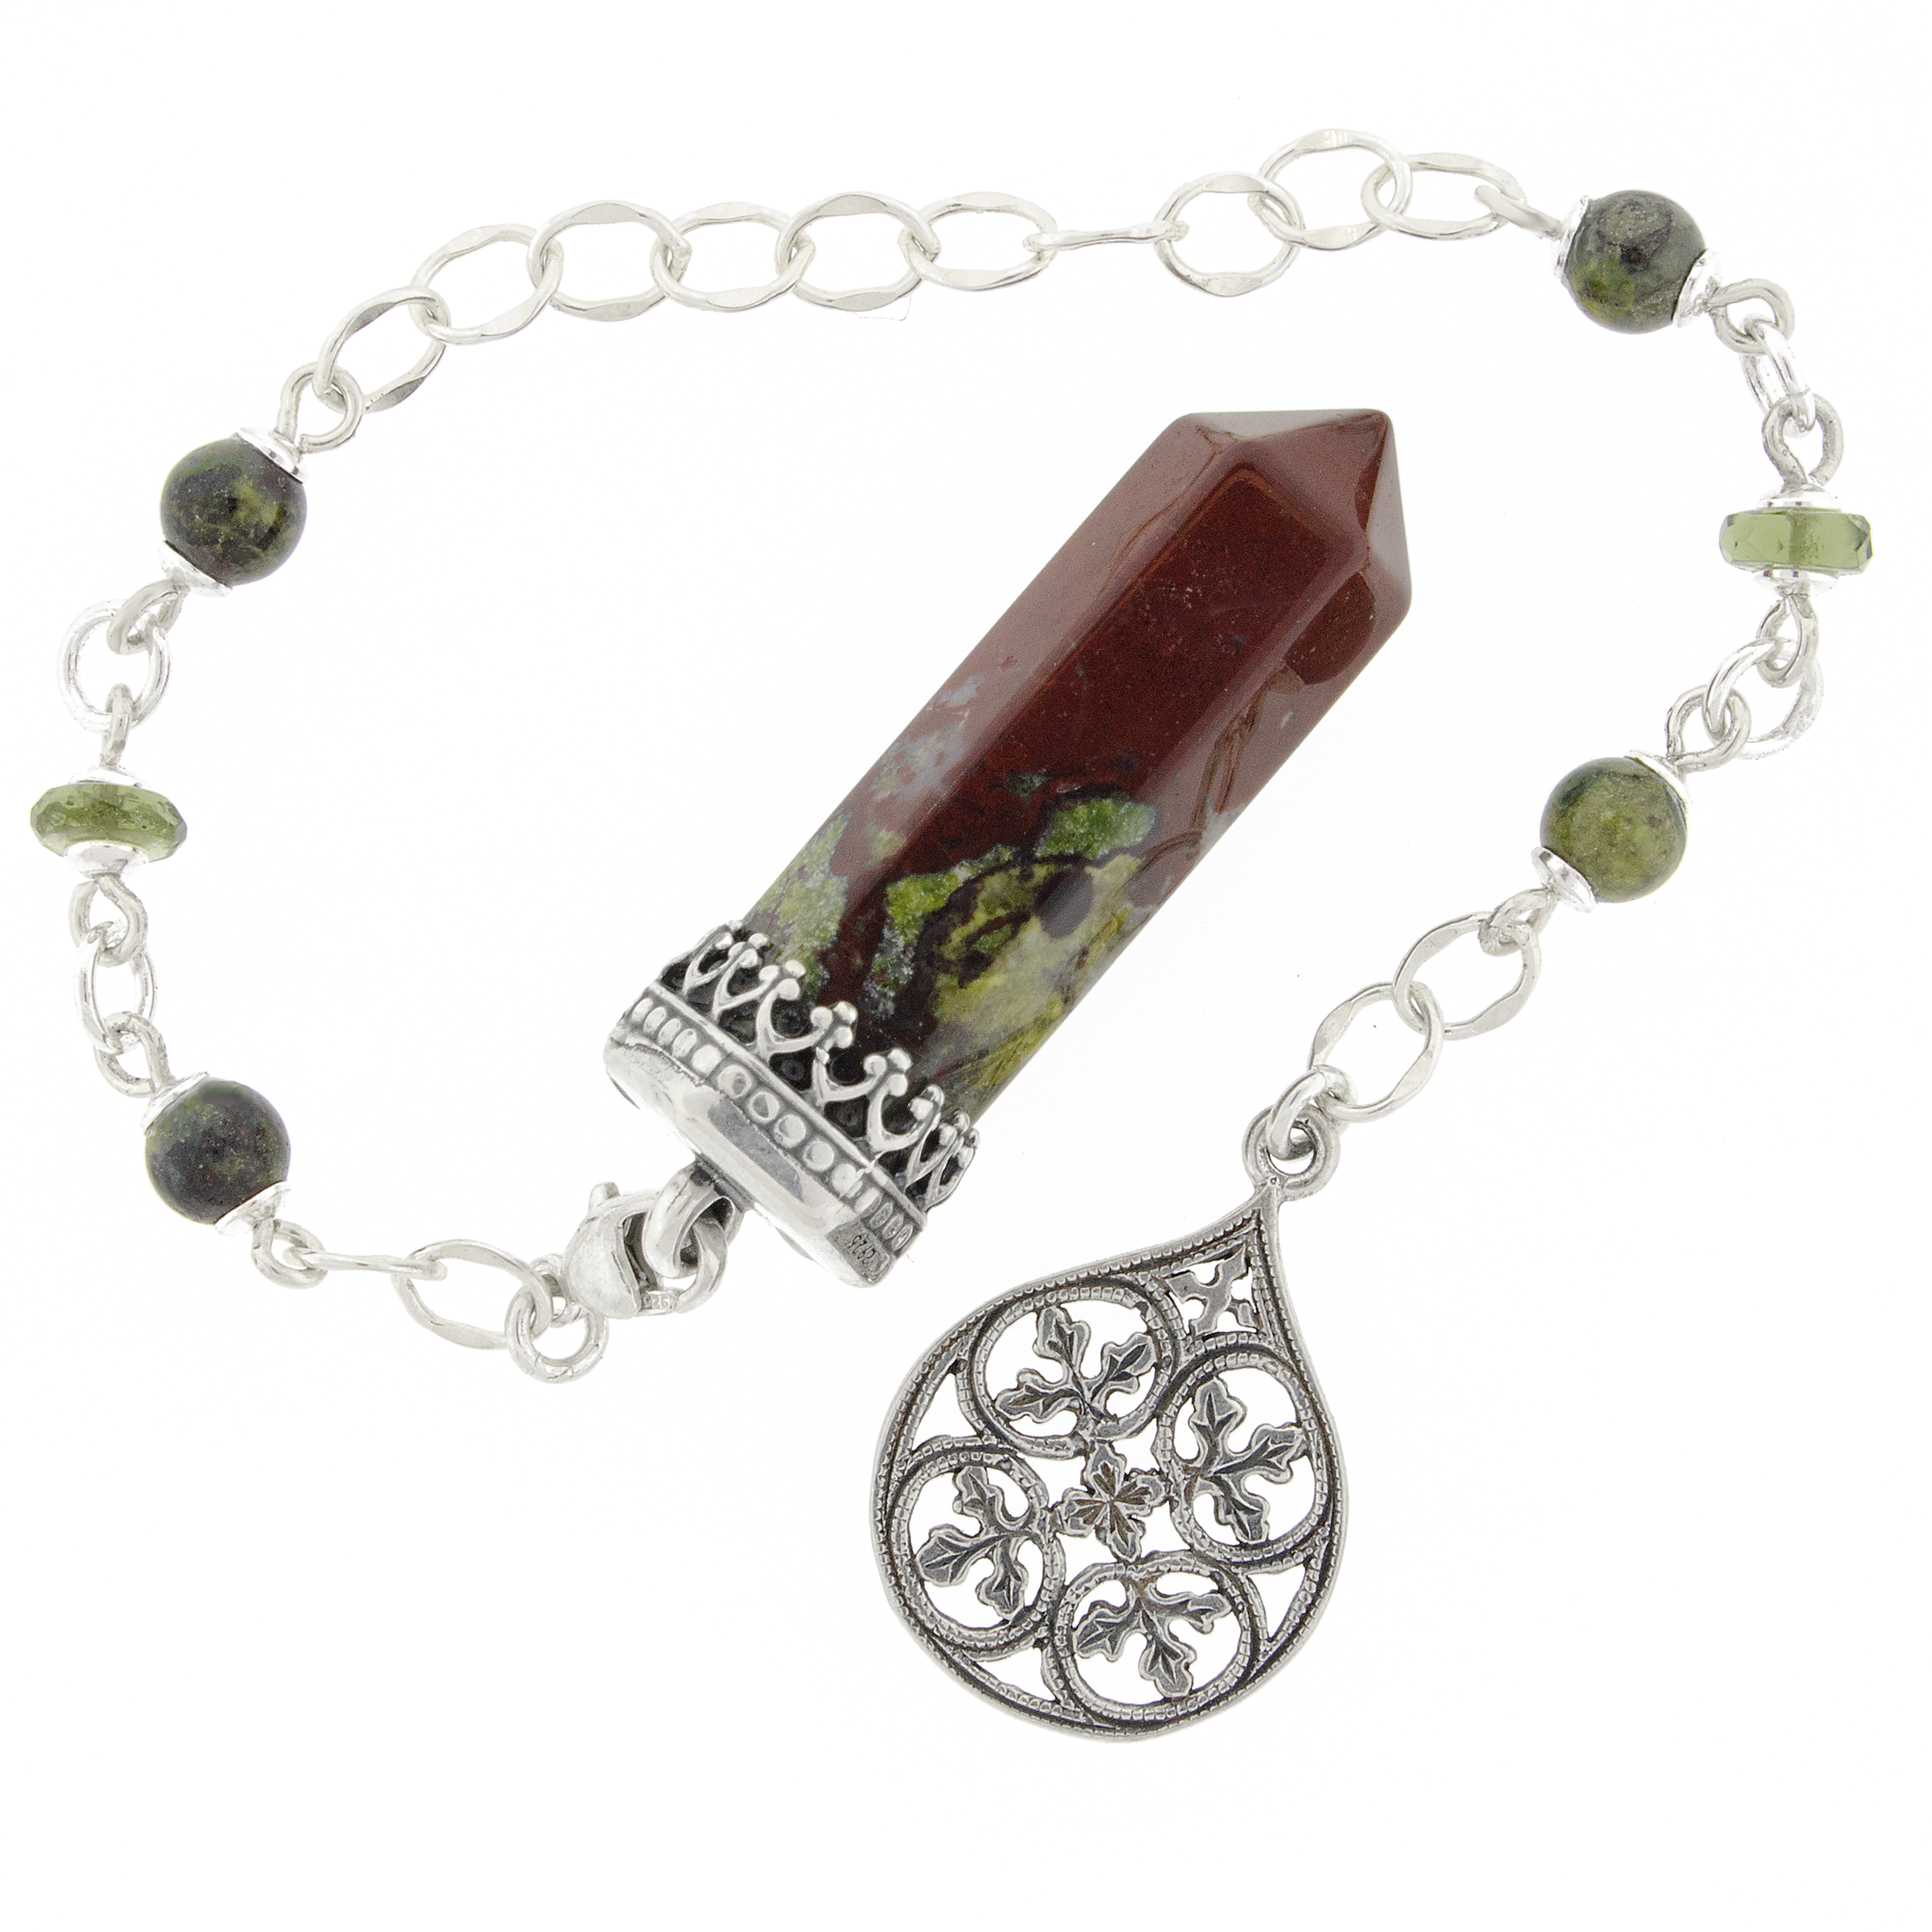 One of a Kind #361 - Dragons Blood Jasper, Moldavite, and Sterling Silver Pendulum by Ask Your Pendulum